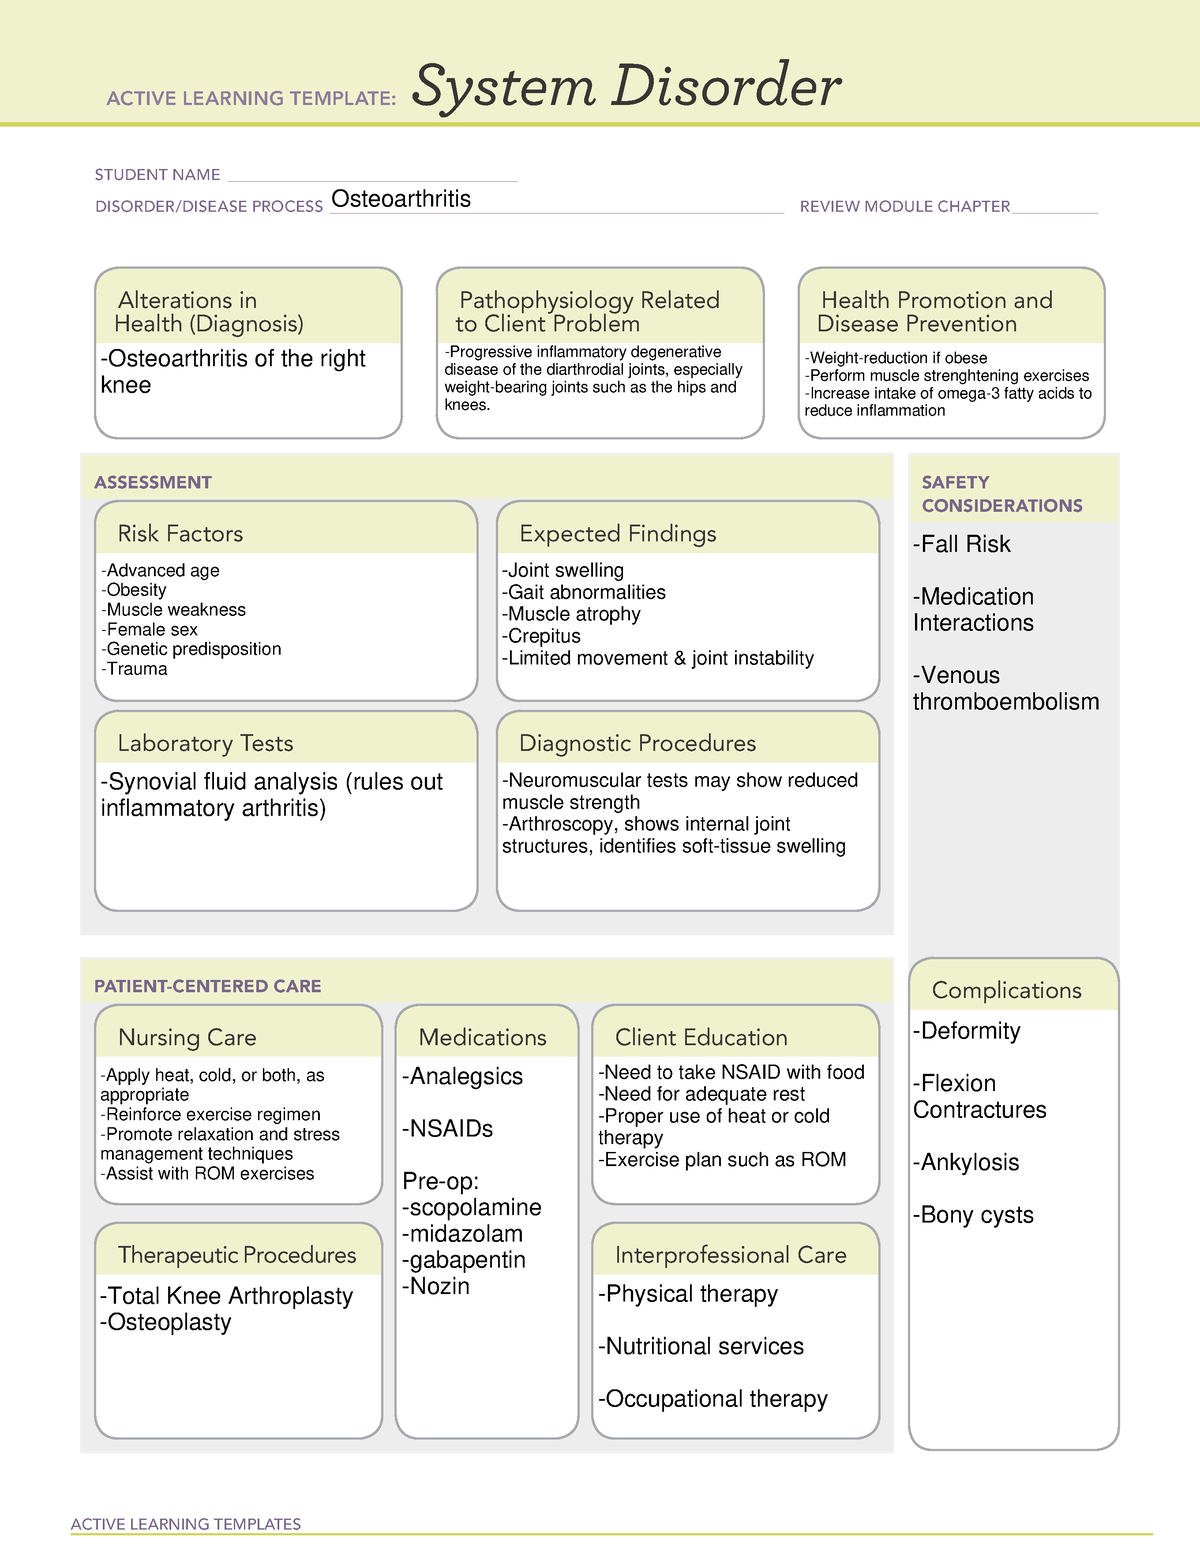 System Disorder Form (Osteoarthritis) - ACTIVE LEARNING TEMPLATES ...